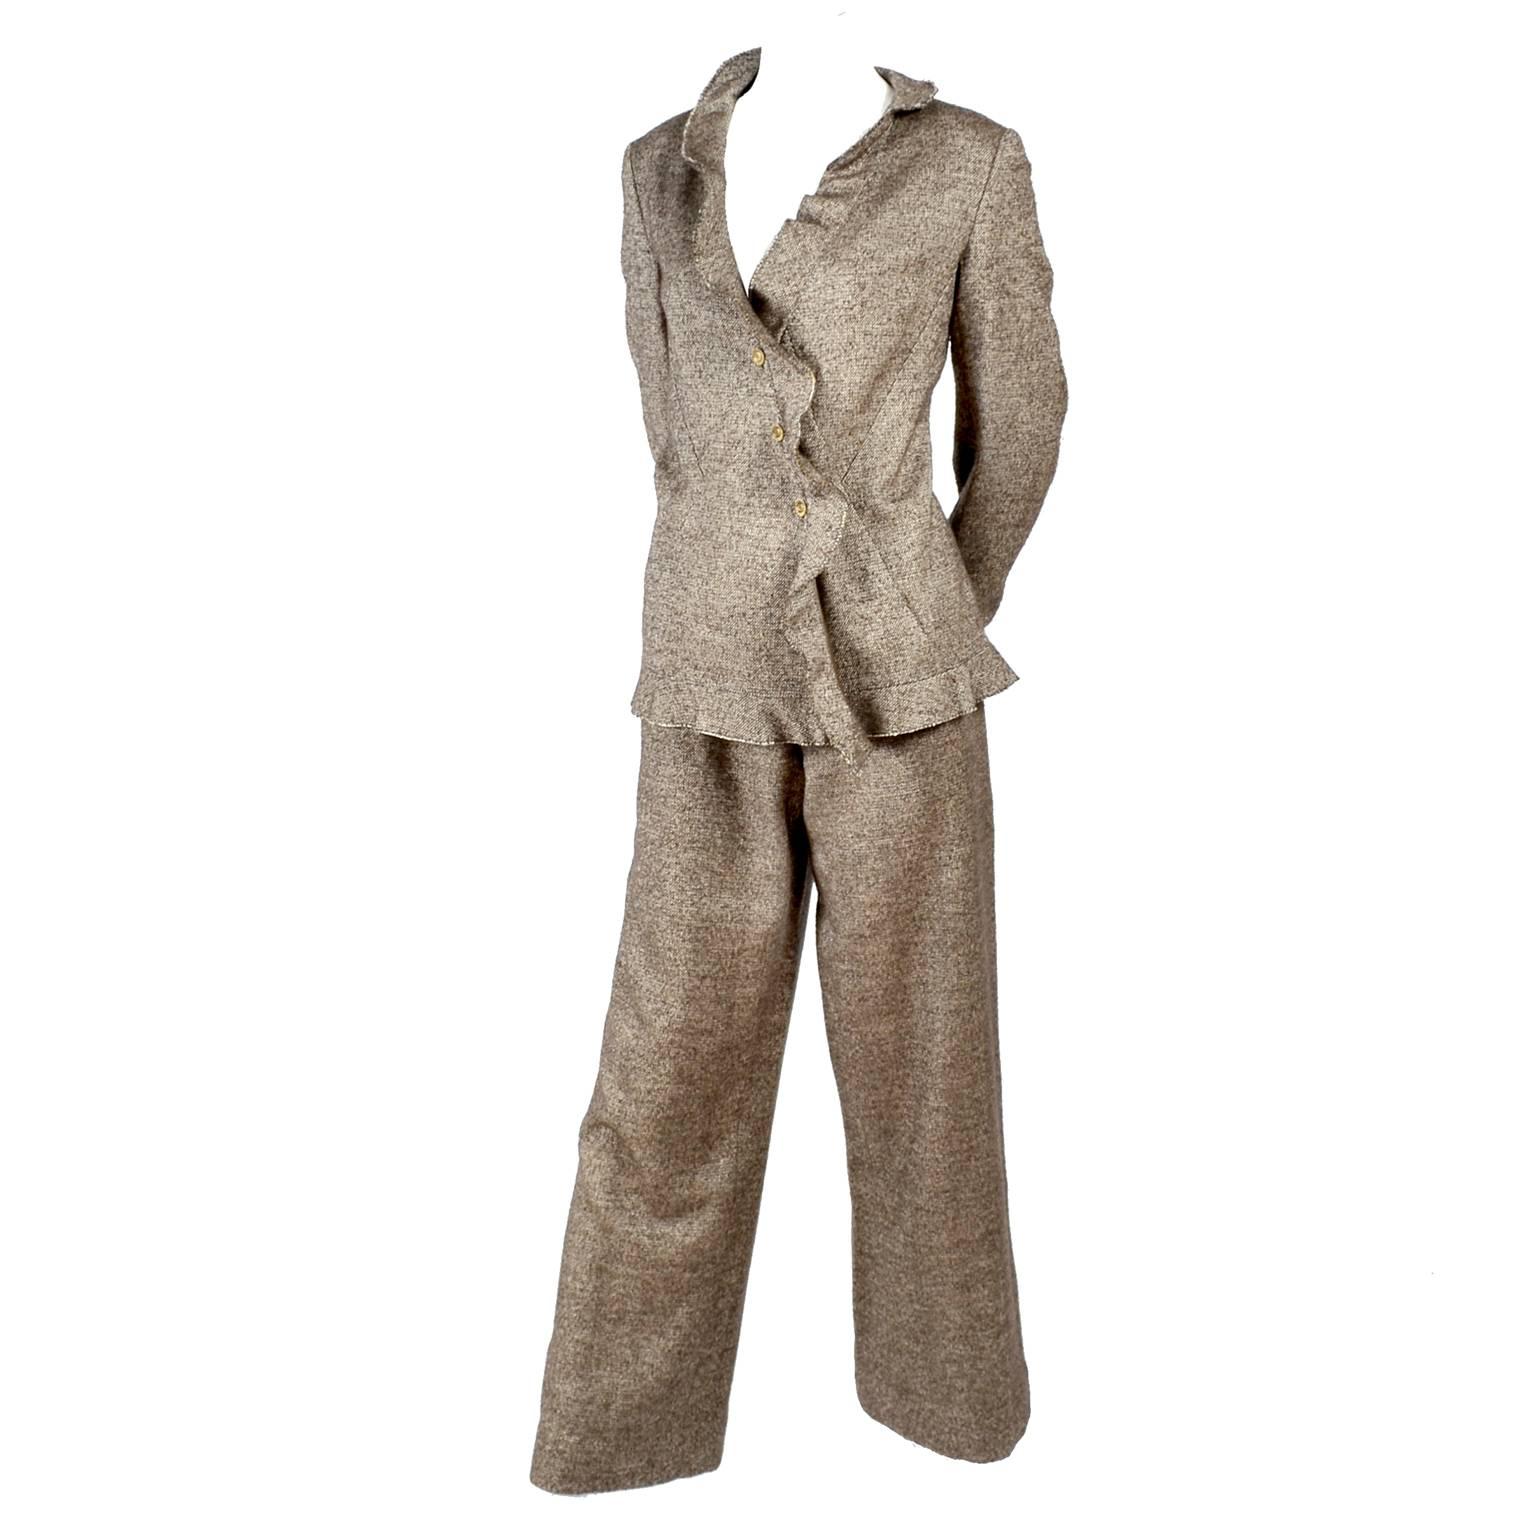 Bergdorf Goodman on Instagram INSTANT CLASSIC  Let chanelofficials  latest cardigan and pant set anchor your weekend wa  Weekend wardrobe  Fashion Pants set